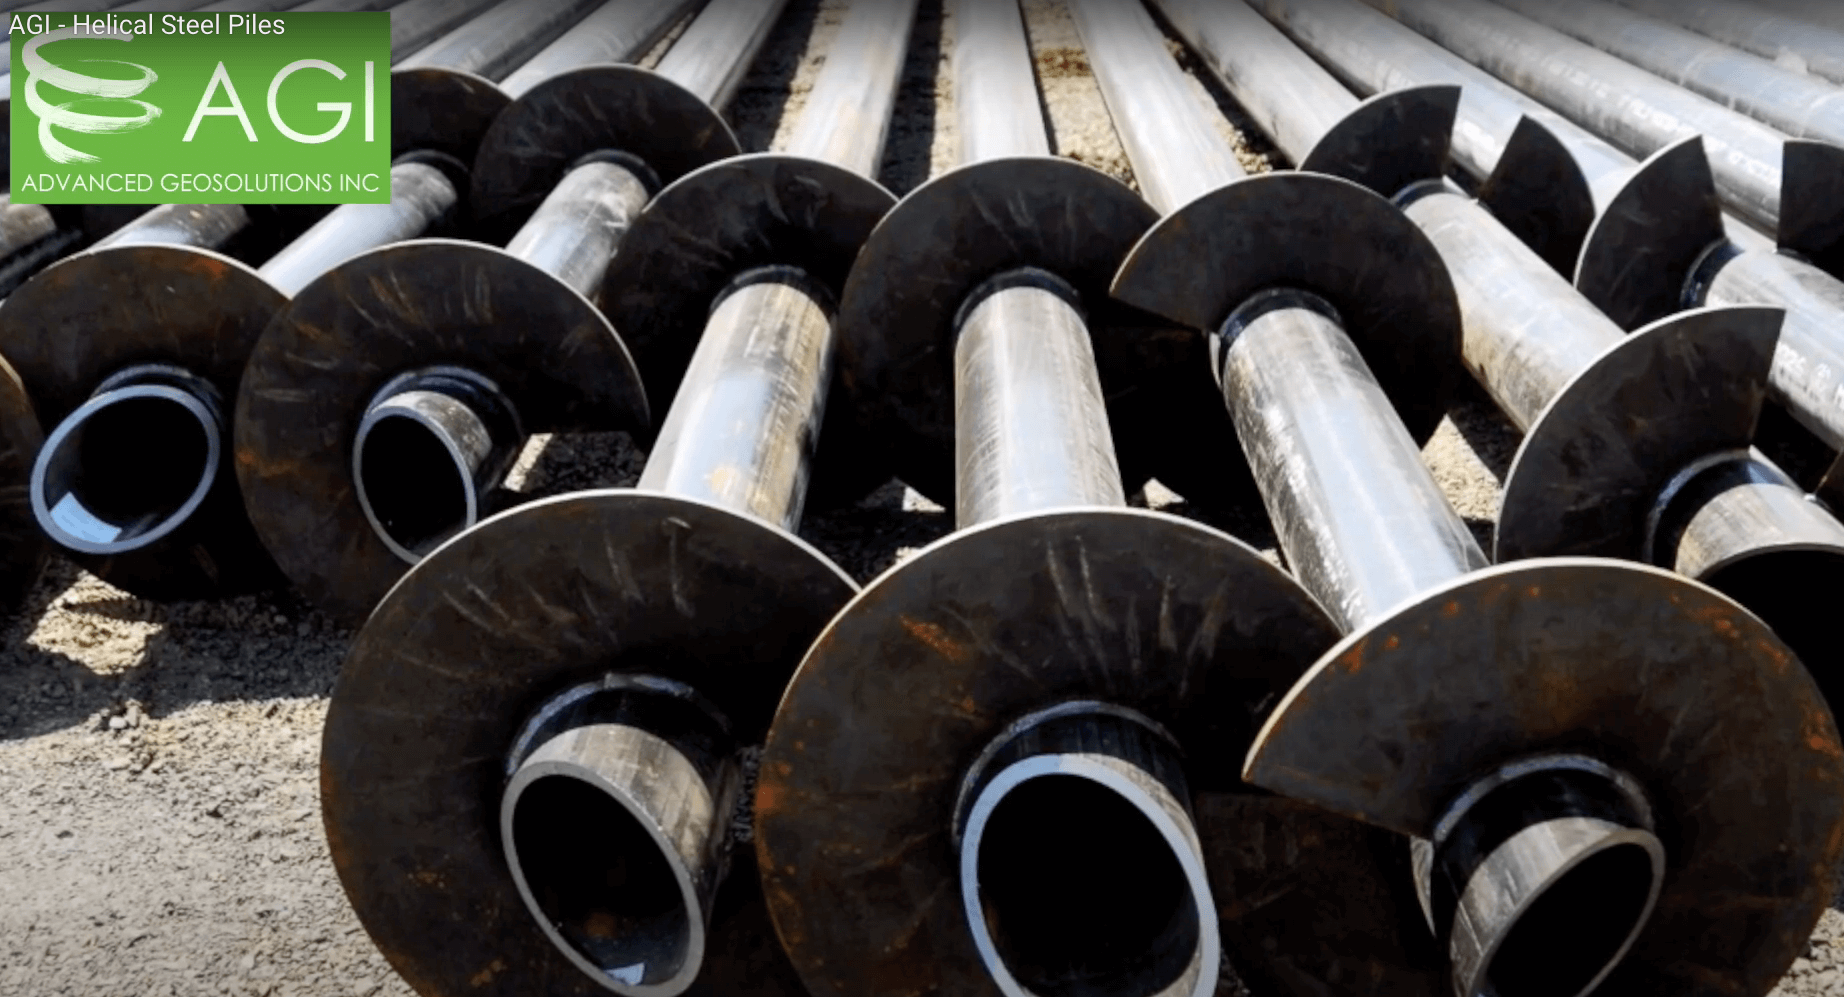 Advanced GeoSolutions Helical Steel Piles